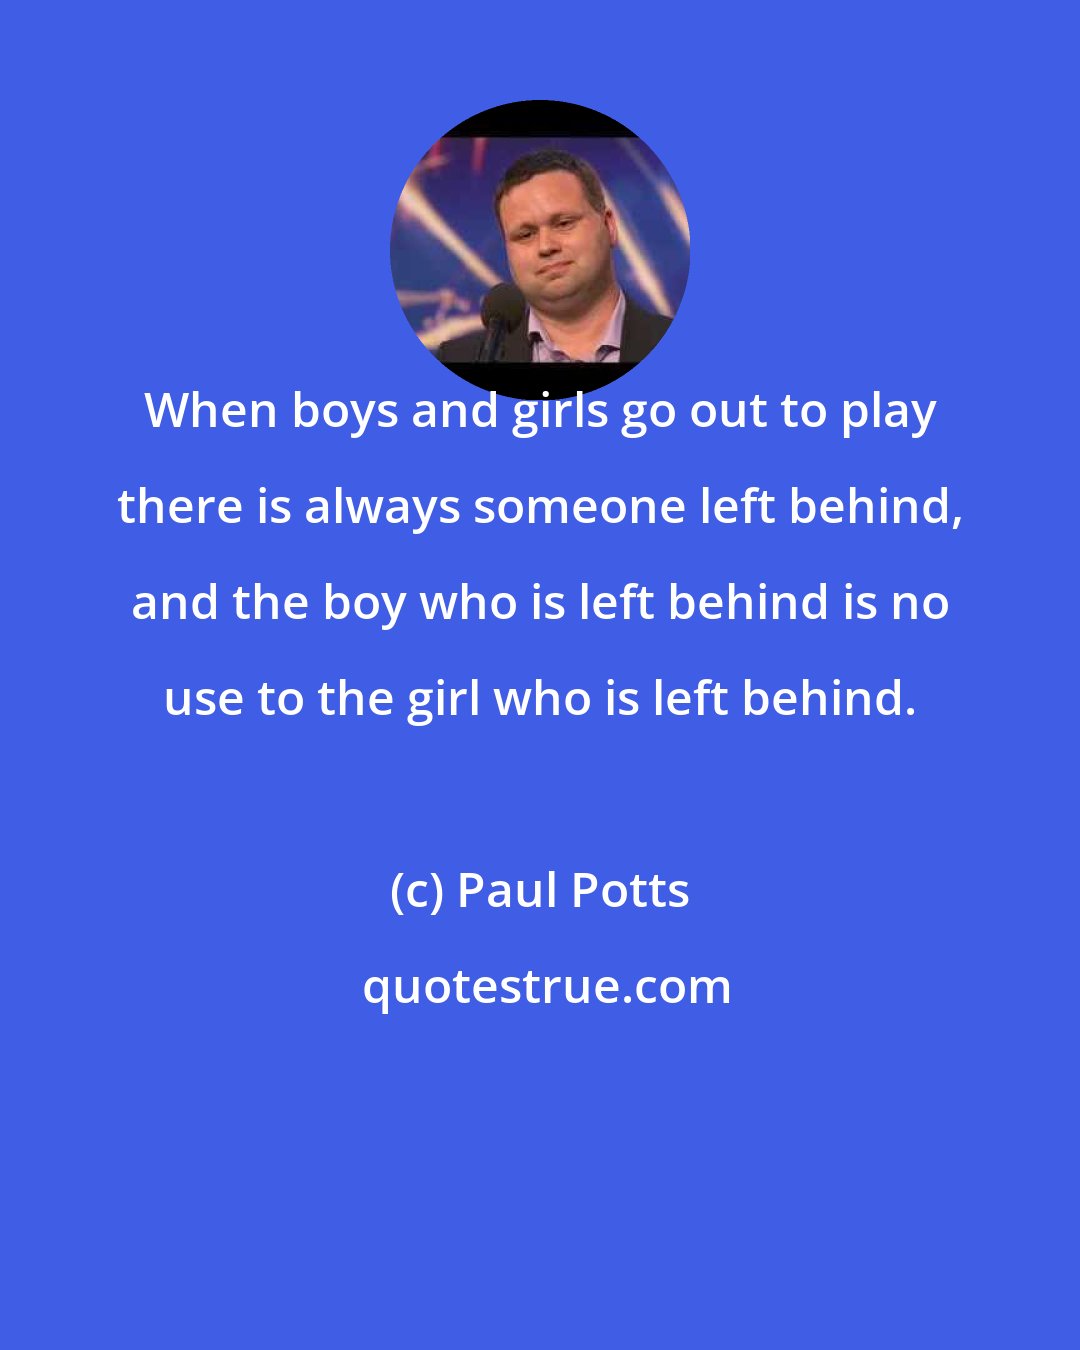 Paul Potts: When boys and girls go out to play there is always someone left behind, and the boy who is left behind is no use to the girl who is left behind.